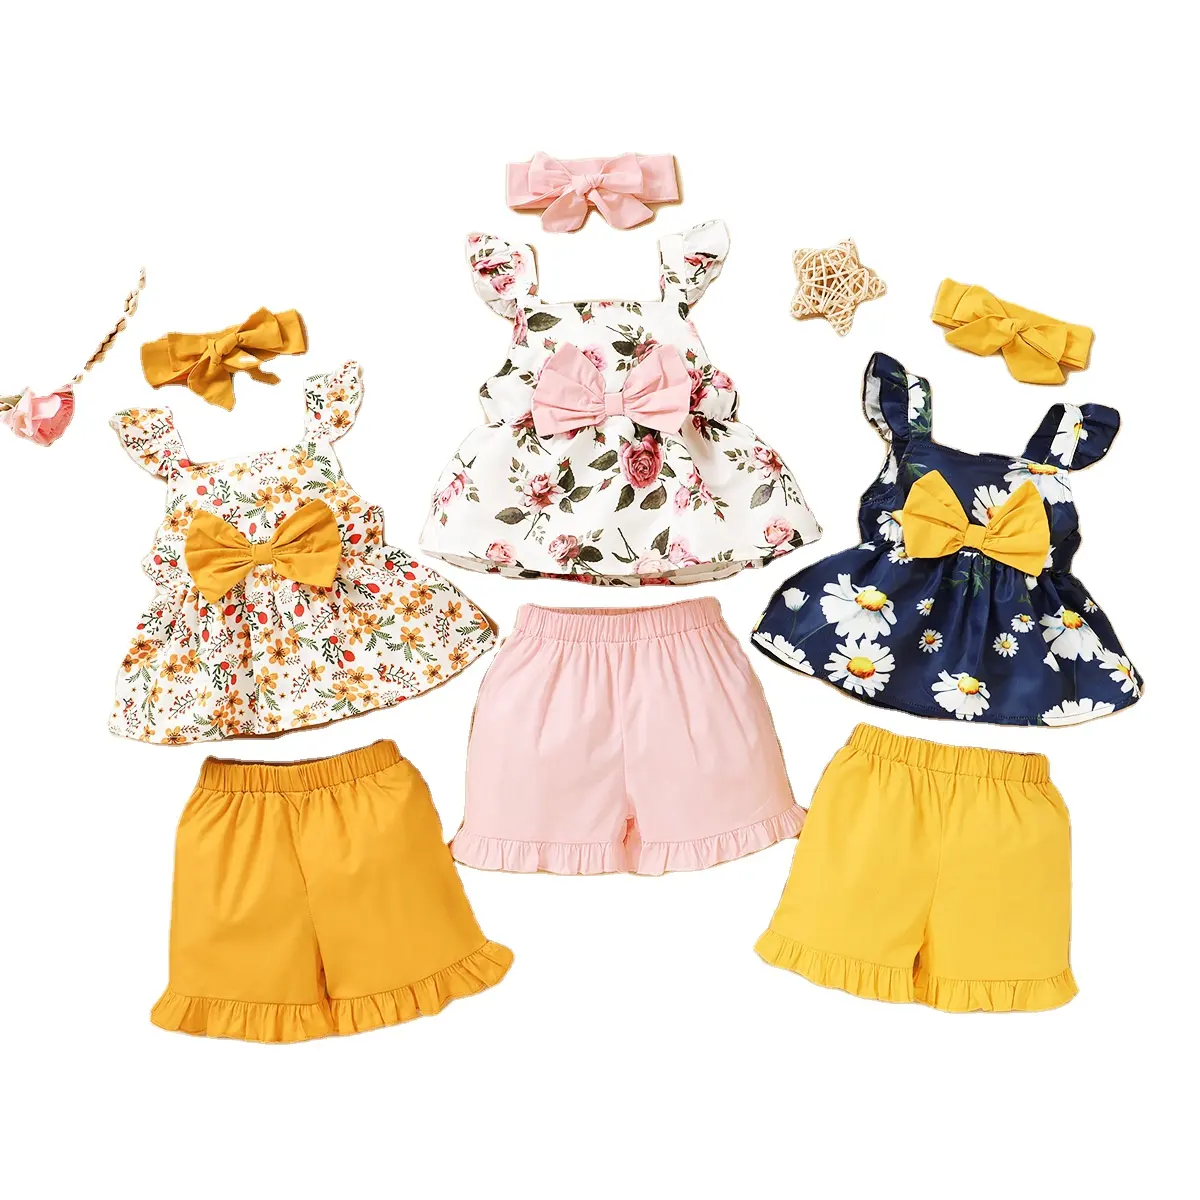 Kids Baby Girl Clothes 2021 Fashion Cute Toddler Baby Clothing Summer Girls Clothes Sets Floral Tops T-Shirts Shorts Pants Kids Outfits